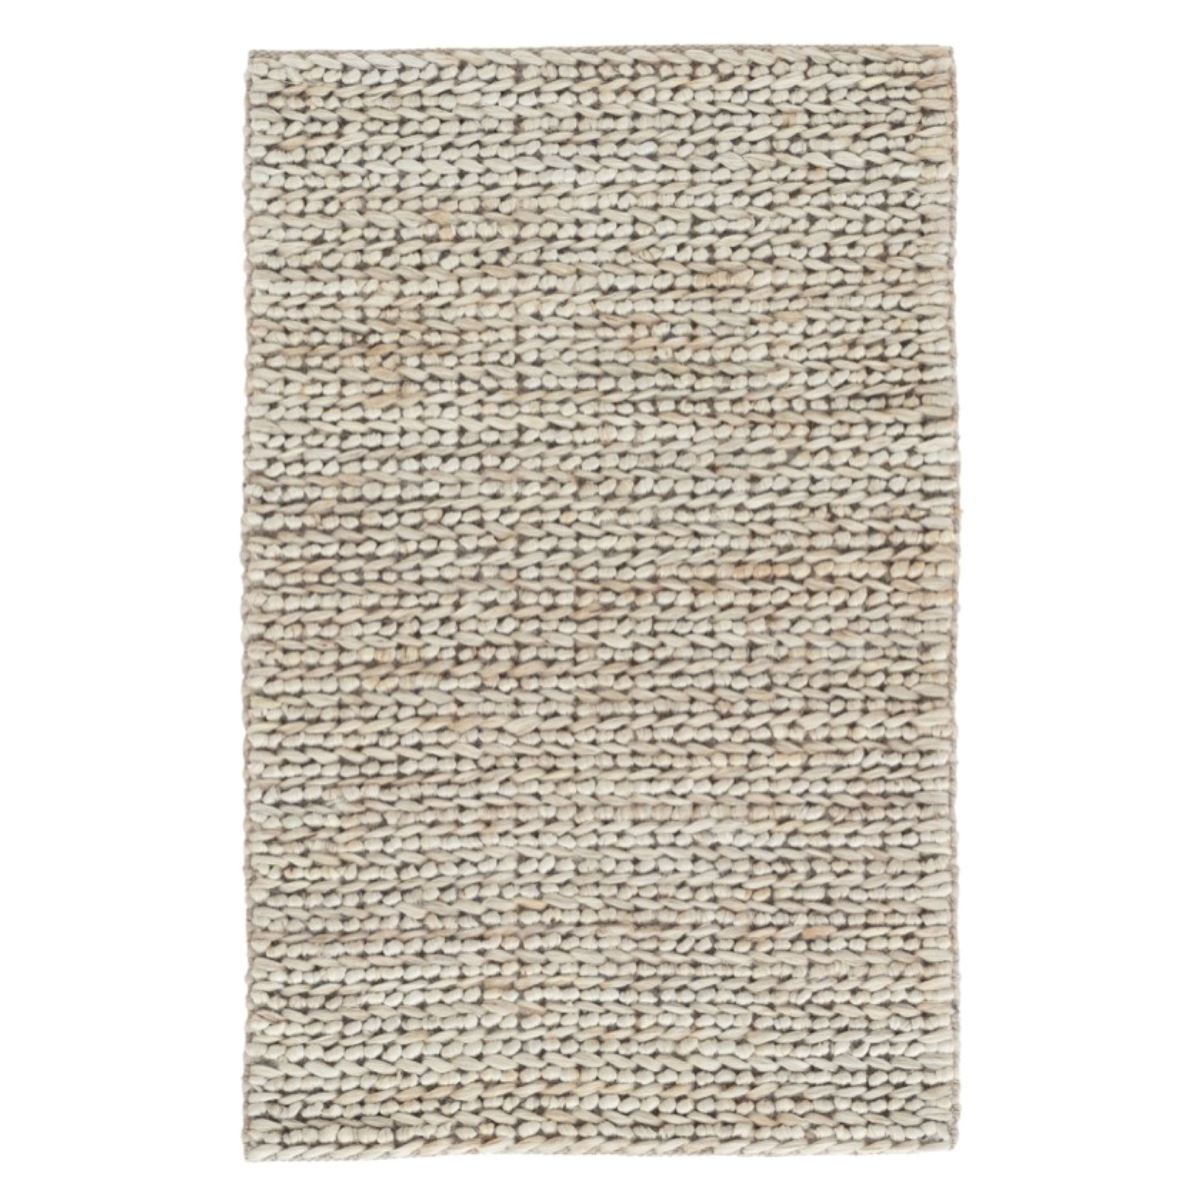 Jute Woven Ice Rug. Top view. 